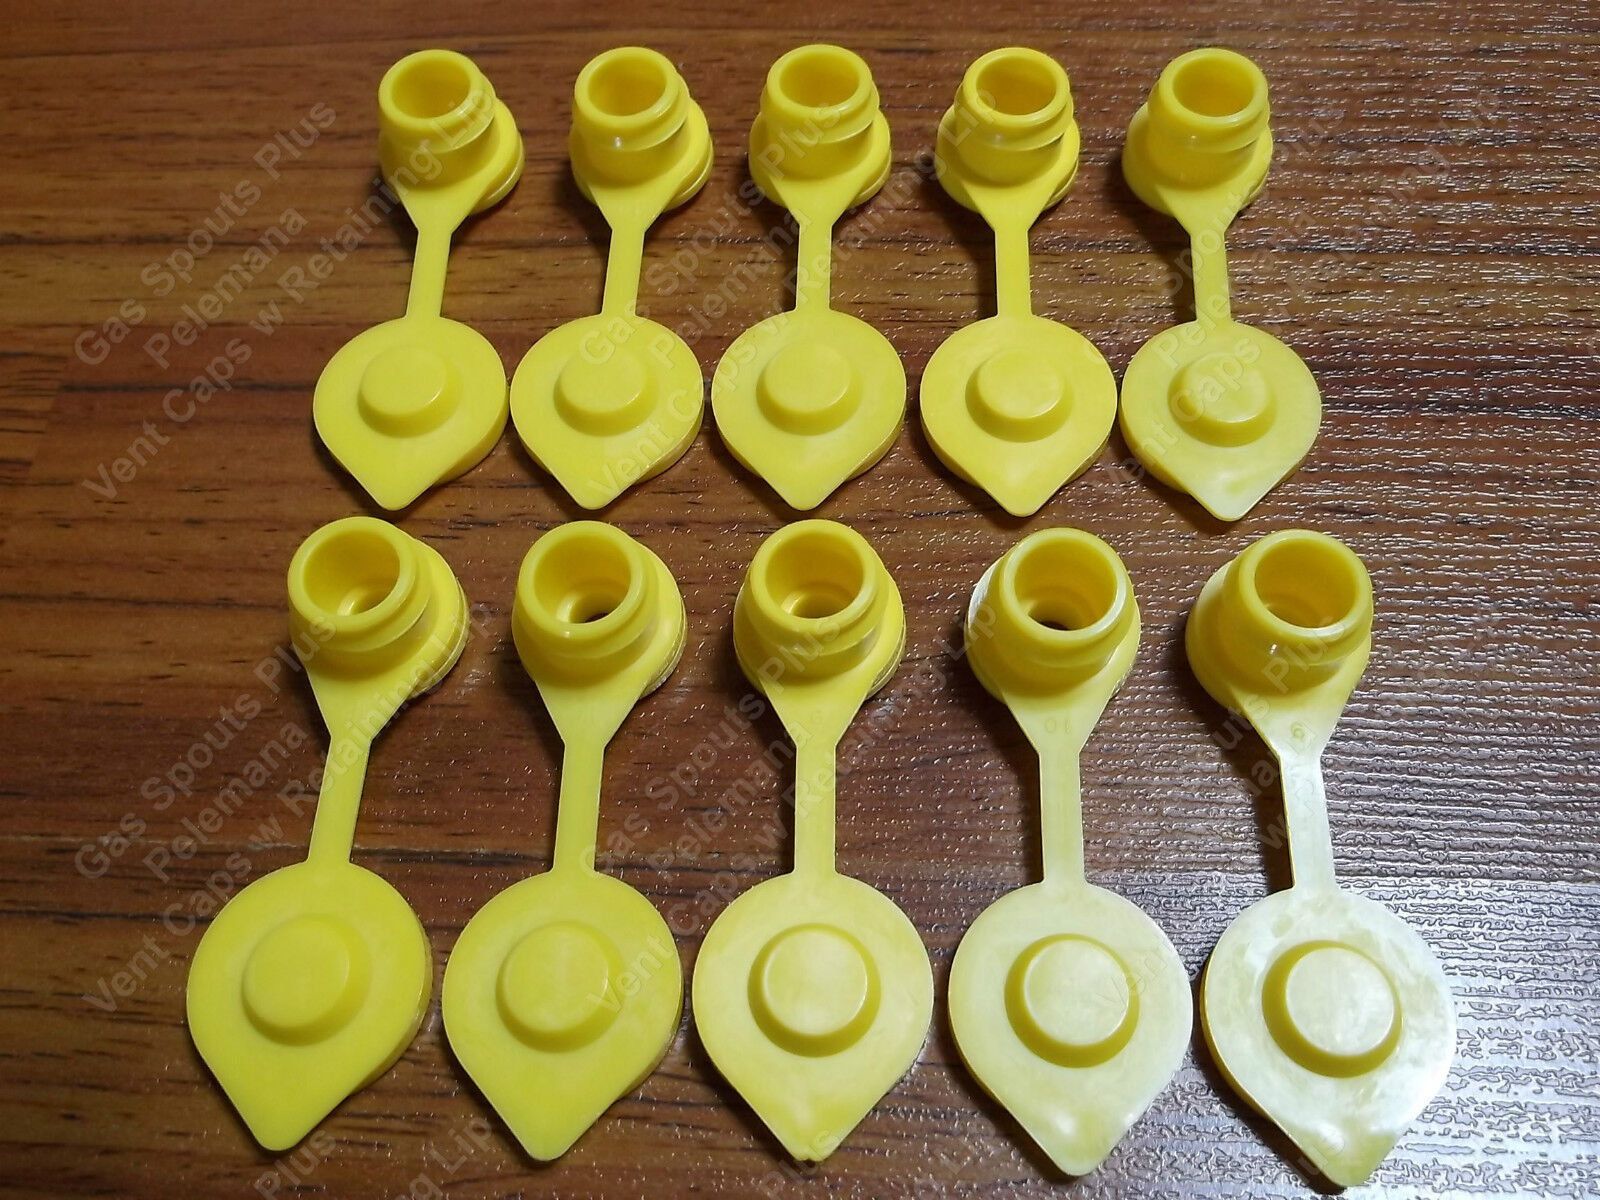 10 New Yellow VENT CAPS Gas Fuel Can Midwest Blitz Scepter Ameri-can HEAVY DUTY TRI-SURE GSP-K409 - фотография #3